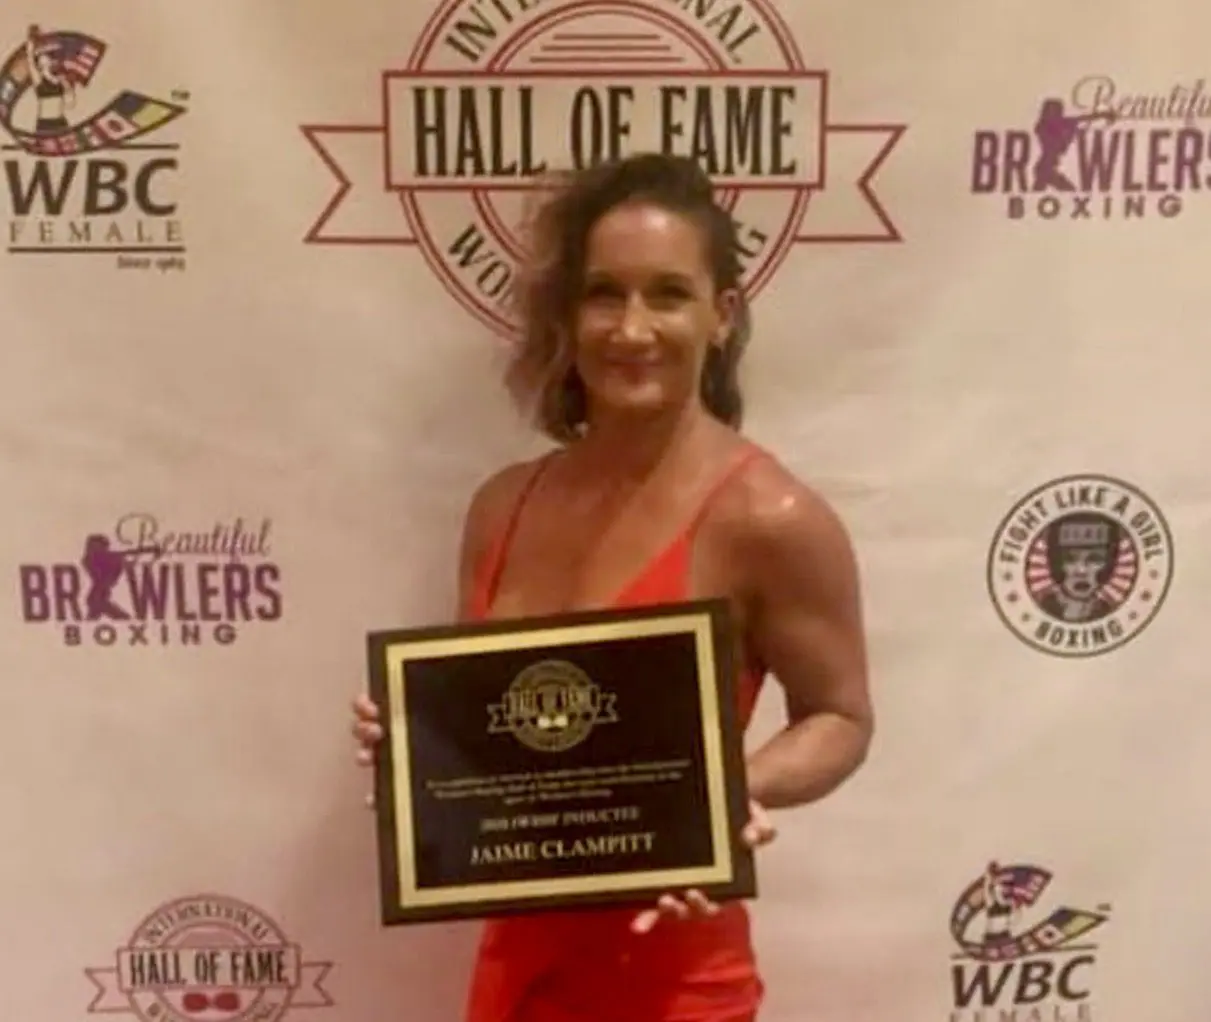 A woman in a red dress holding an award for the hall of fame.